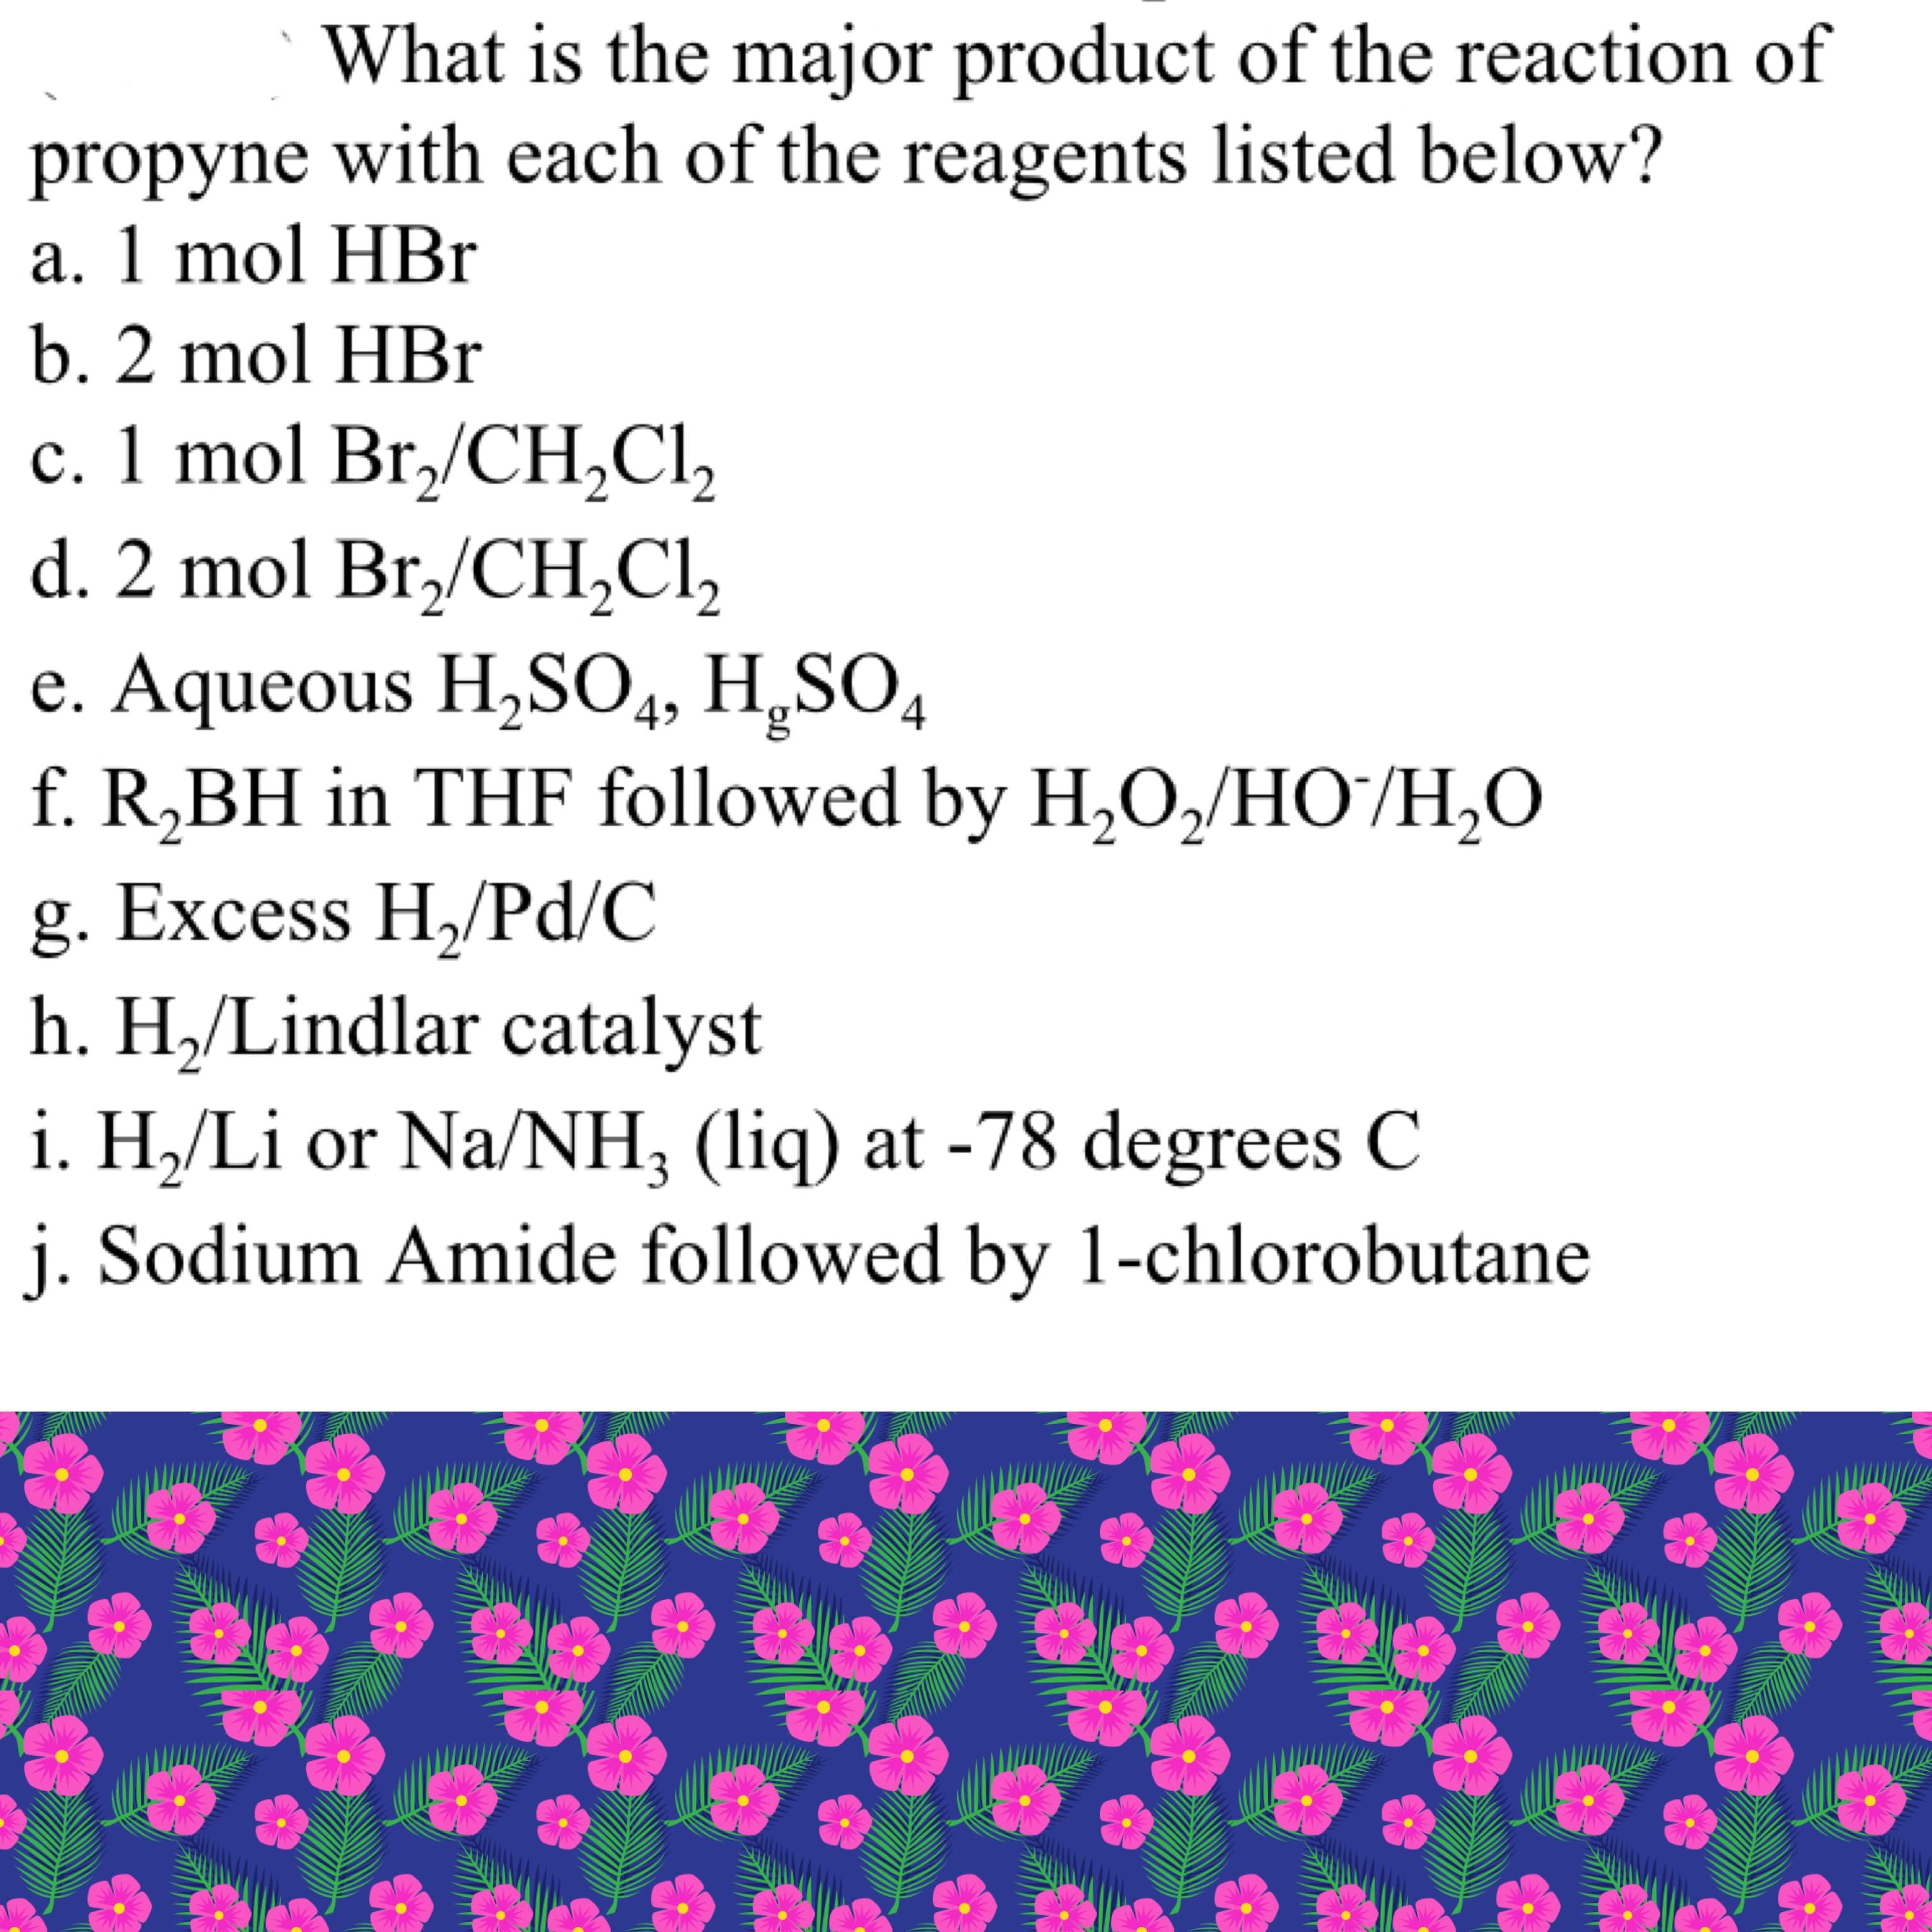 What is the major product of the reaction of
propyne with each of the reagents listed below?
a. 1 mol HBr
b. 2 mol HBr
c. 1 mol Br,/CH,Cl,
d. 2 mol Br,/CH,Cl,
e. Aqueous H,SO4, H̟SO,
f. R,BH in THF followed by H,0,/HOʻ/H,O
g. Excess H,/Pd/C
h. H,/Lindlar catalyst
i. H,/Li or Na/NH; (liq) at -78 degrees C
j. Sodium Amide followed by 1-chlorobutane
